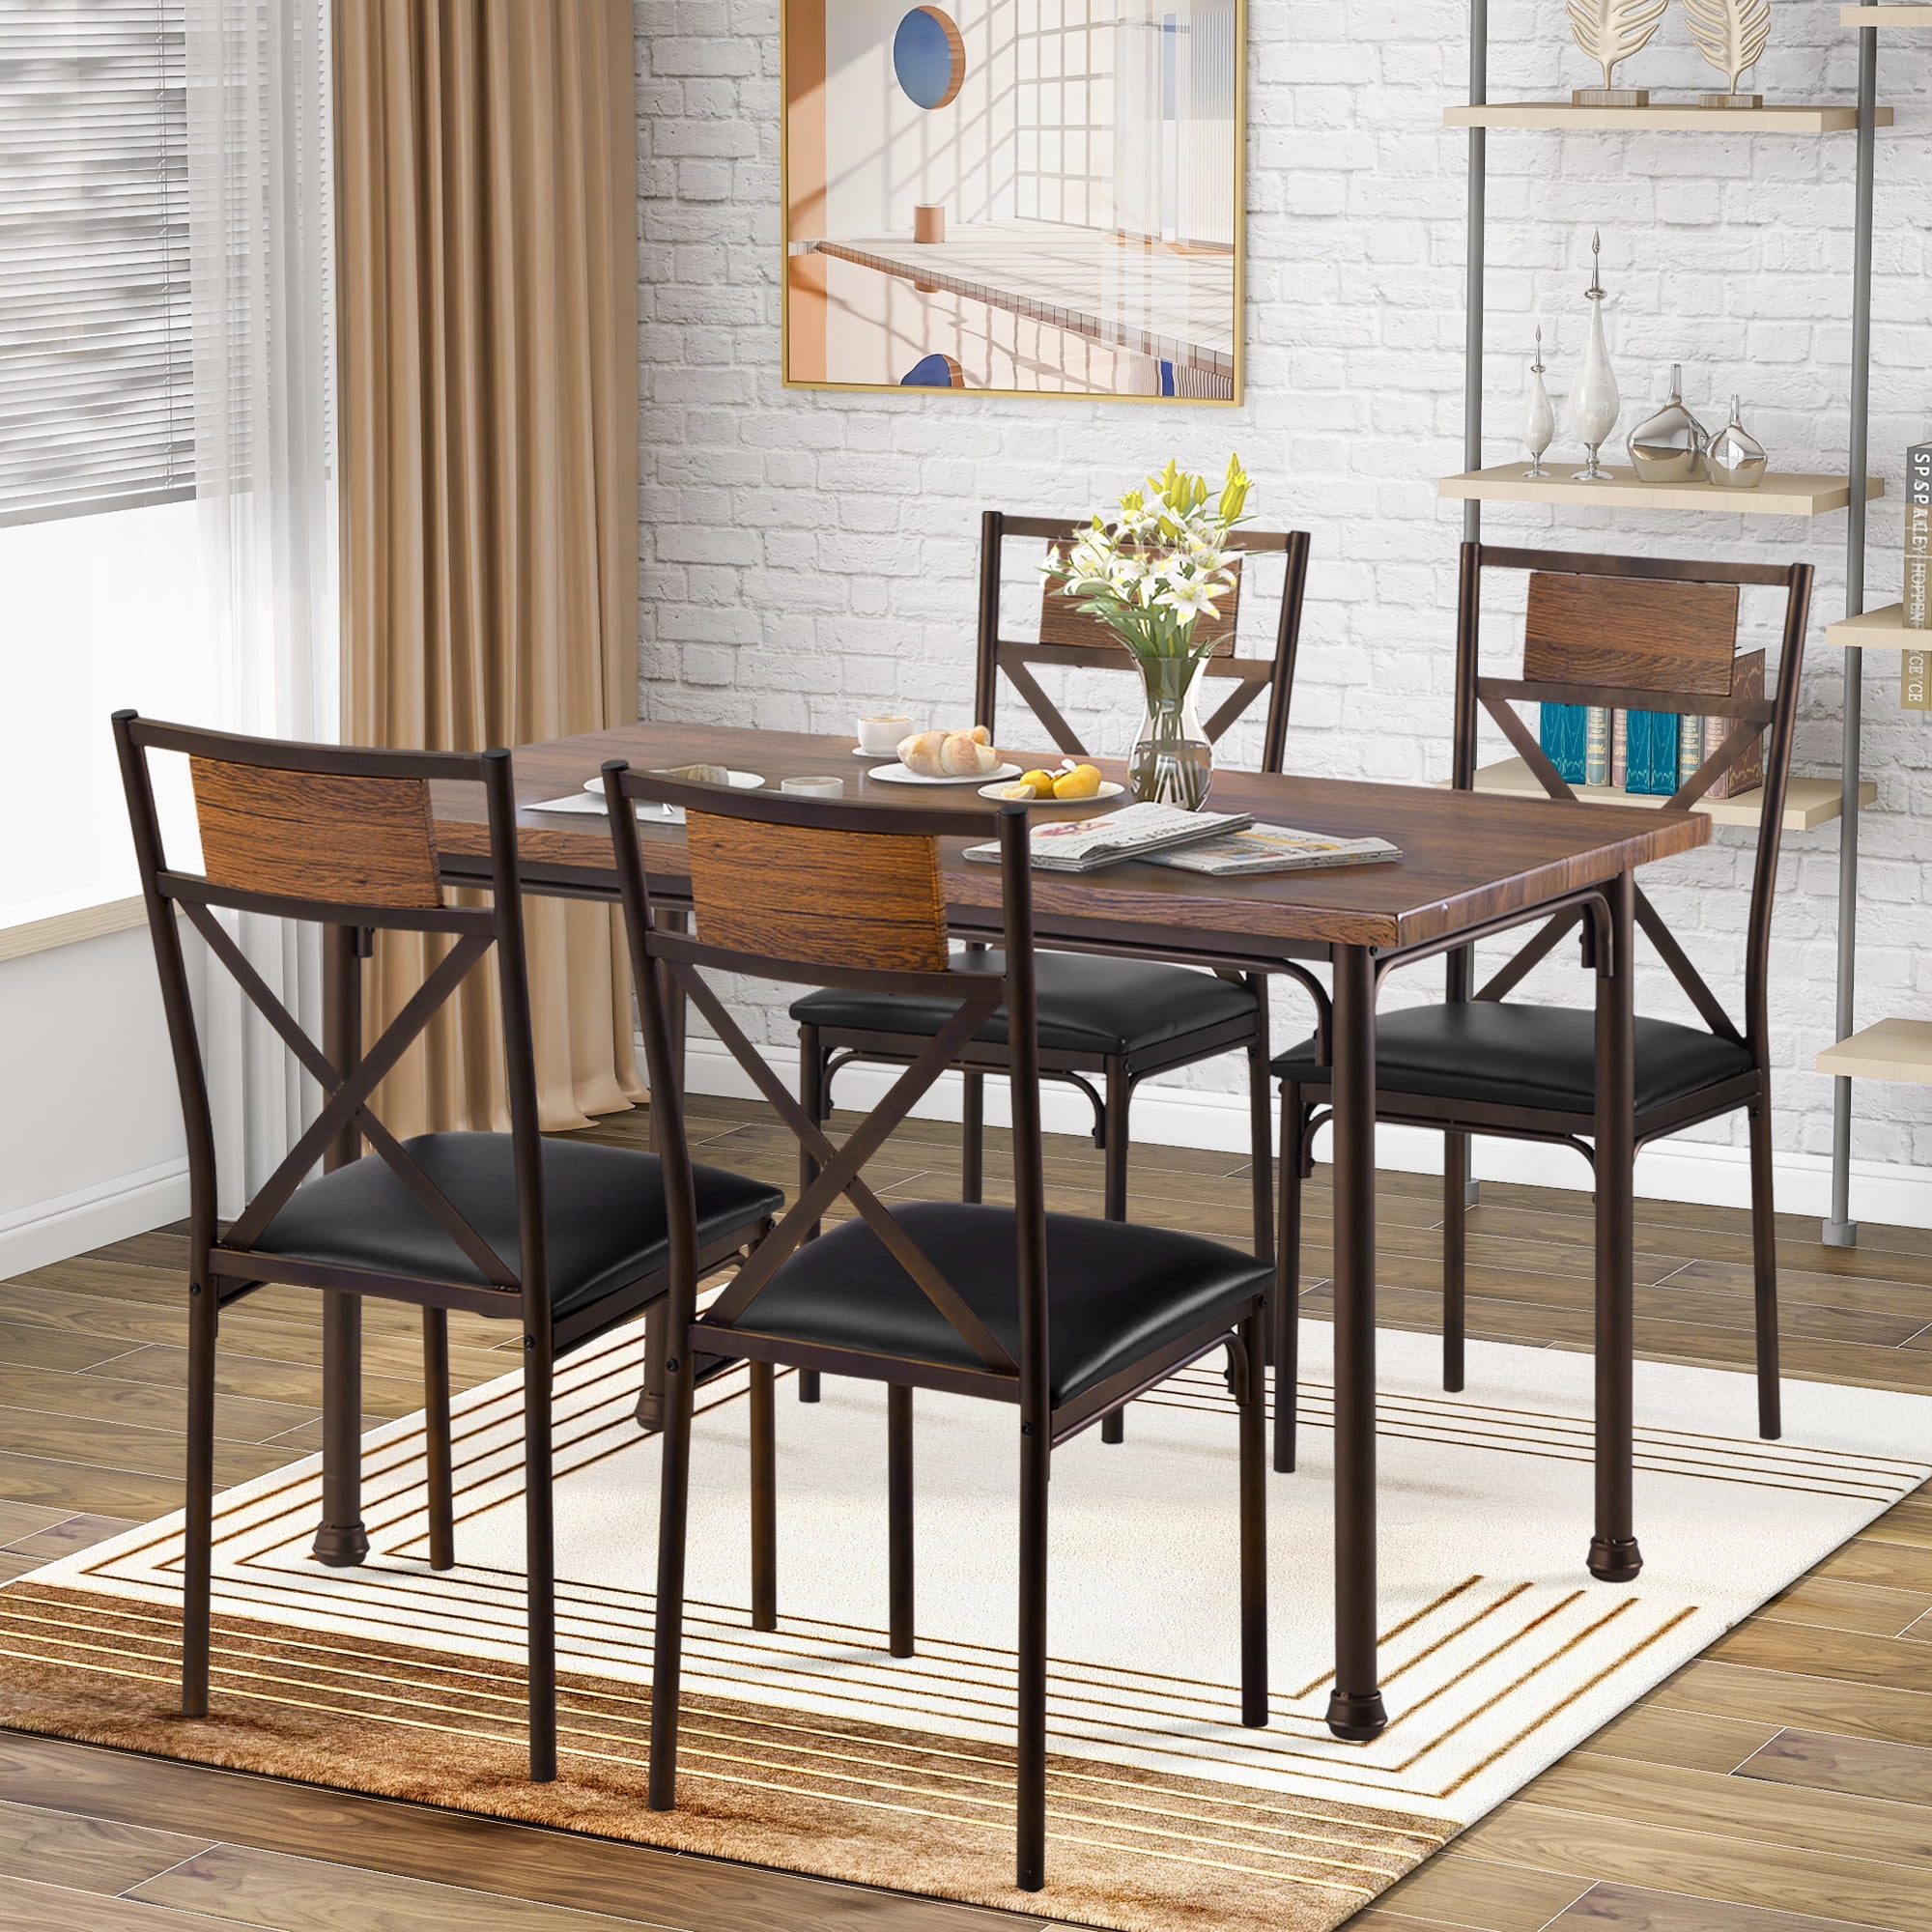 5 Piece Dining Room Table Set Compact, Industrial Chic Dining Room Sets